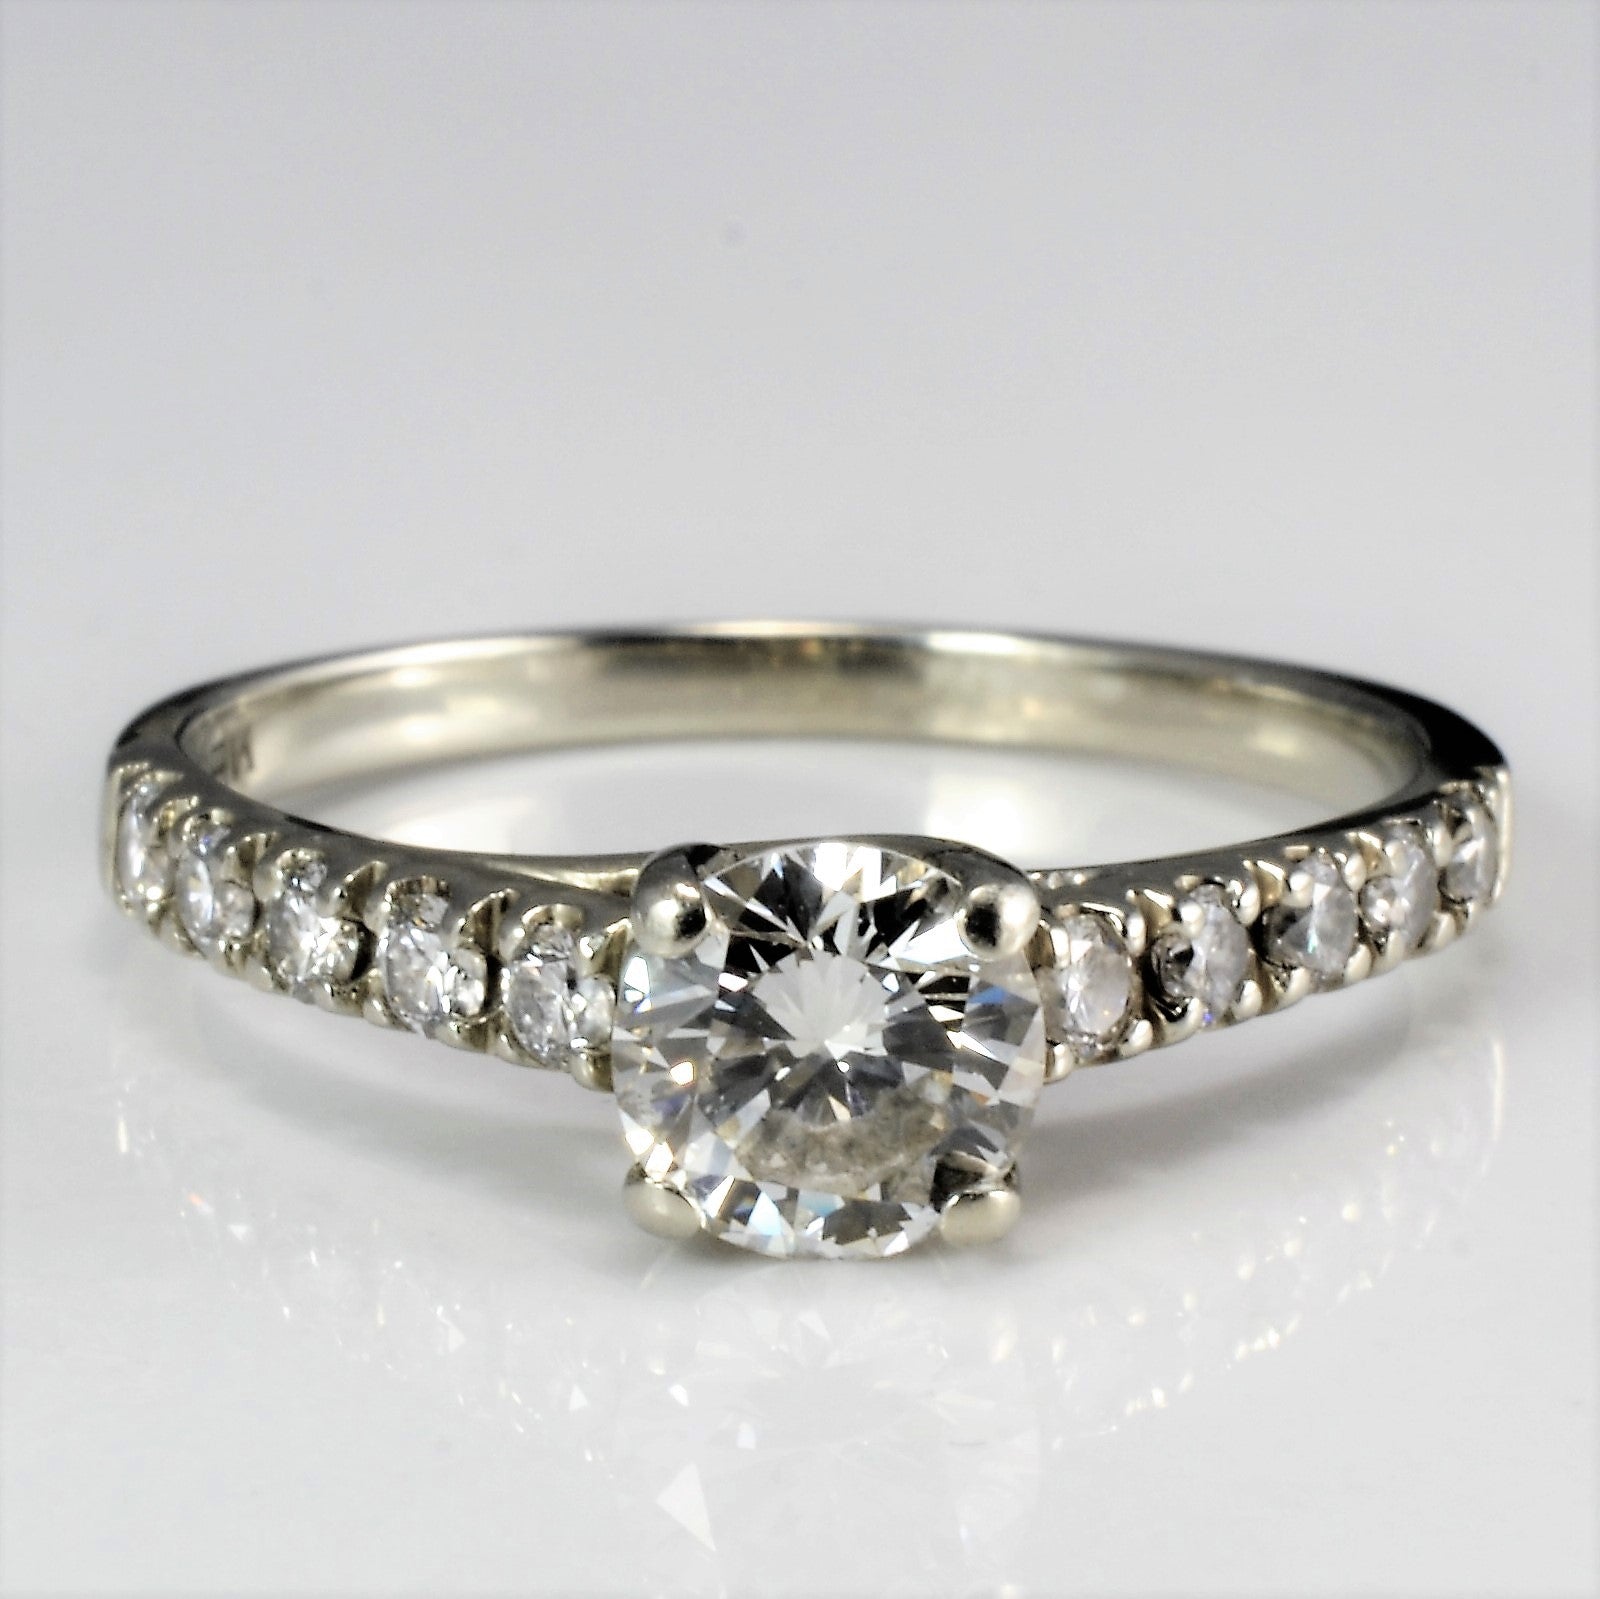 Solitaire with Pave Accents Diamond Engagement Ring | 0.72 ctw, SZ 6 |